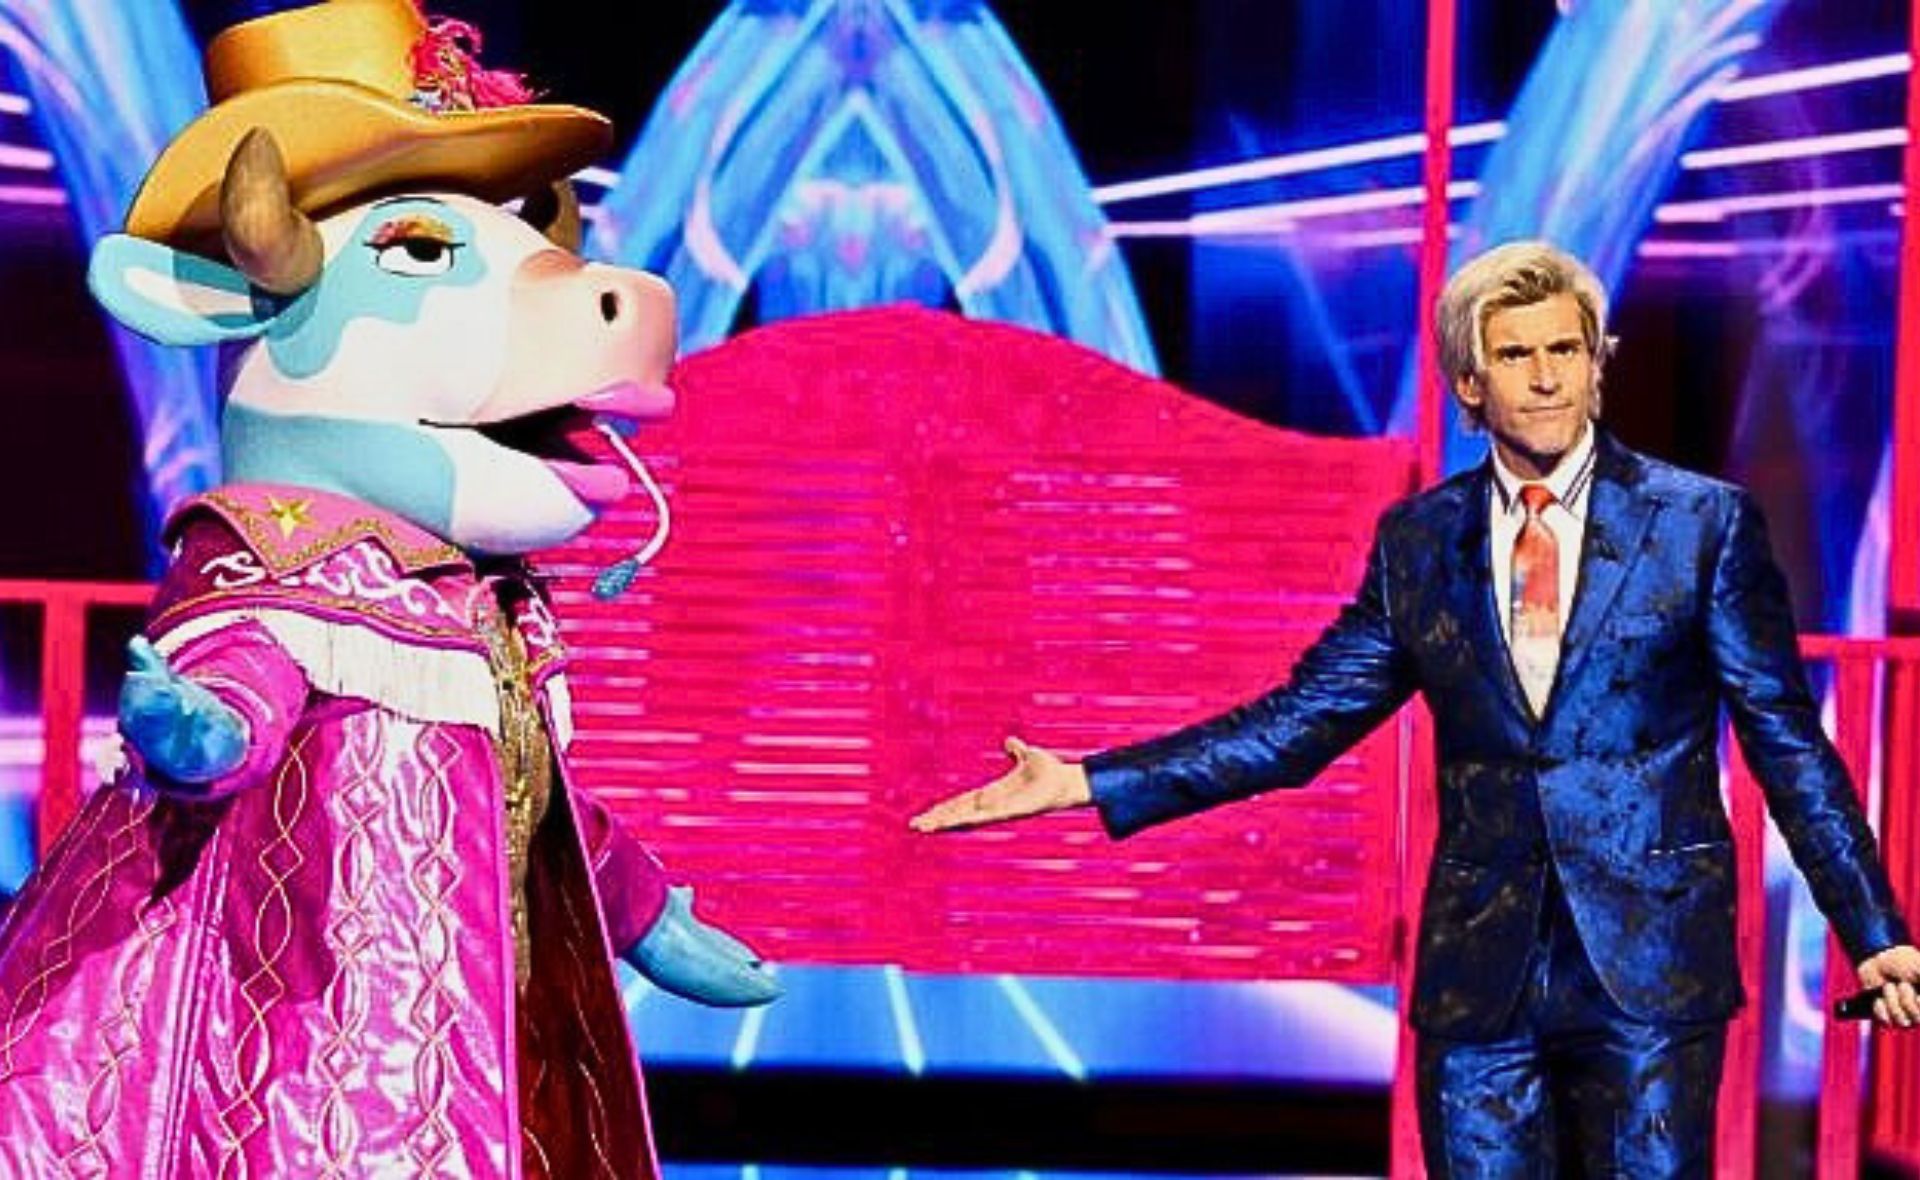 Has the winner of The Masked Singer 2023 been leaked? Fans think they know who will win